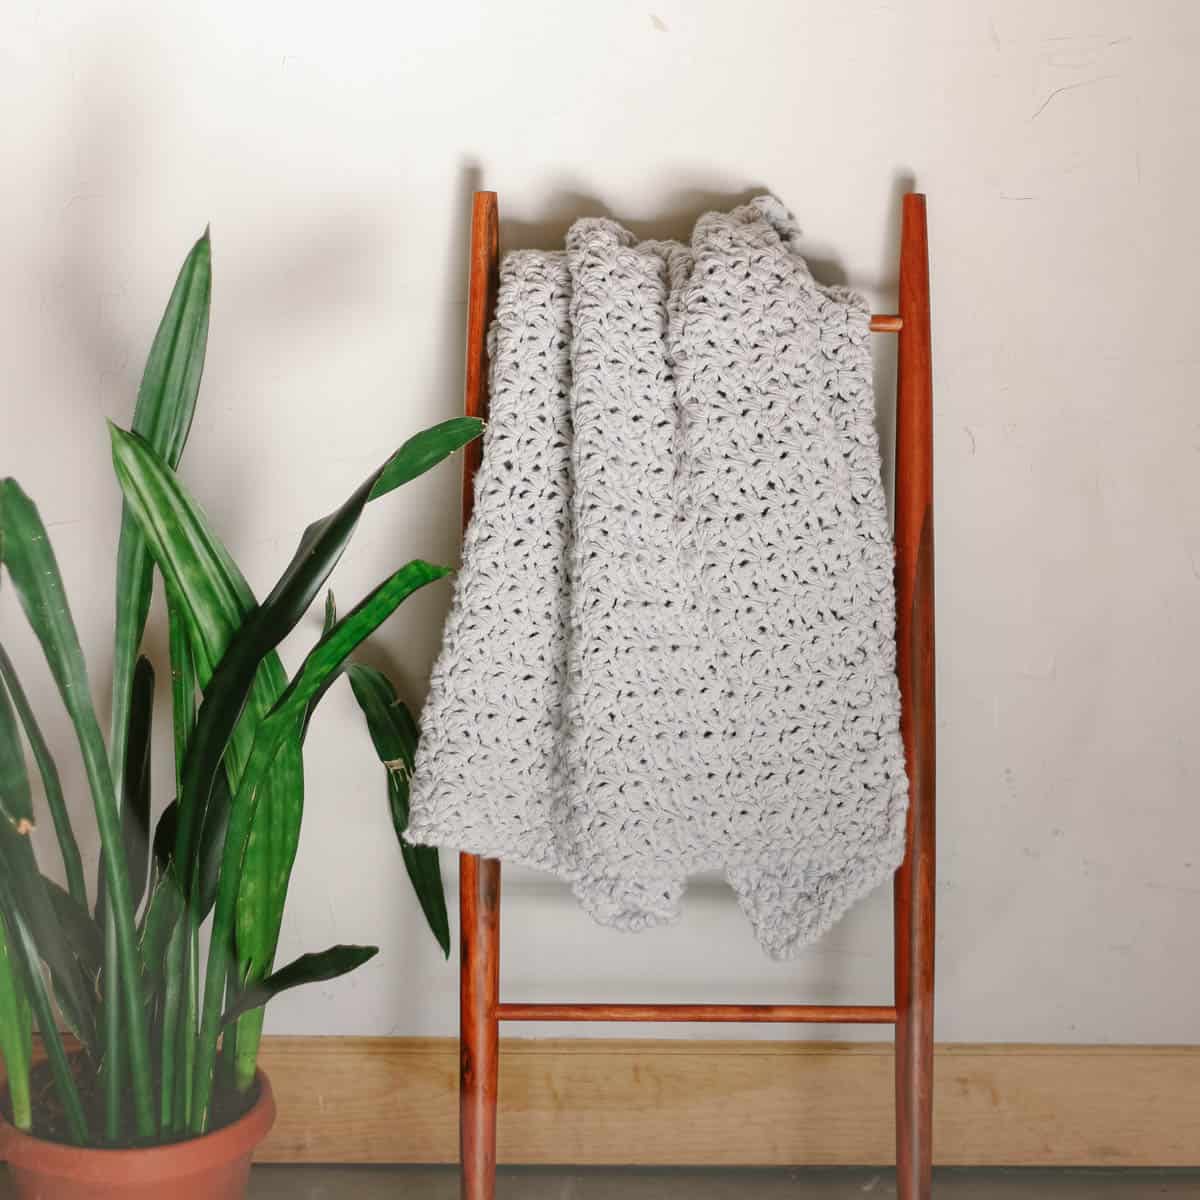 Done in a Weekend Quick Free Crochet Baby Blanket Pattern » Make & Do Crew